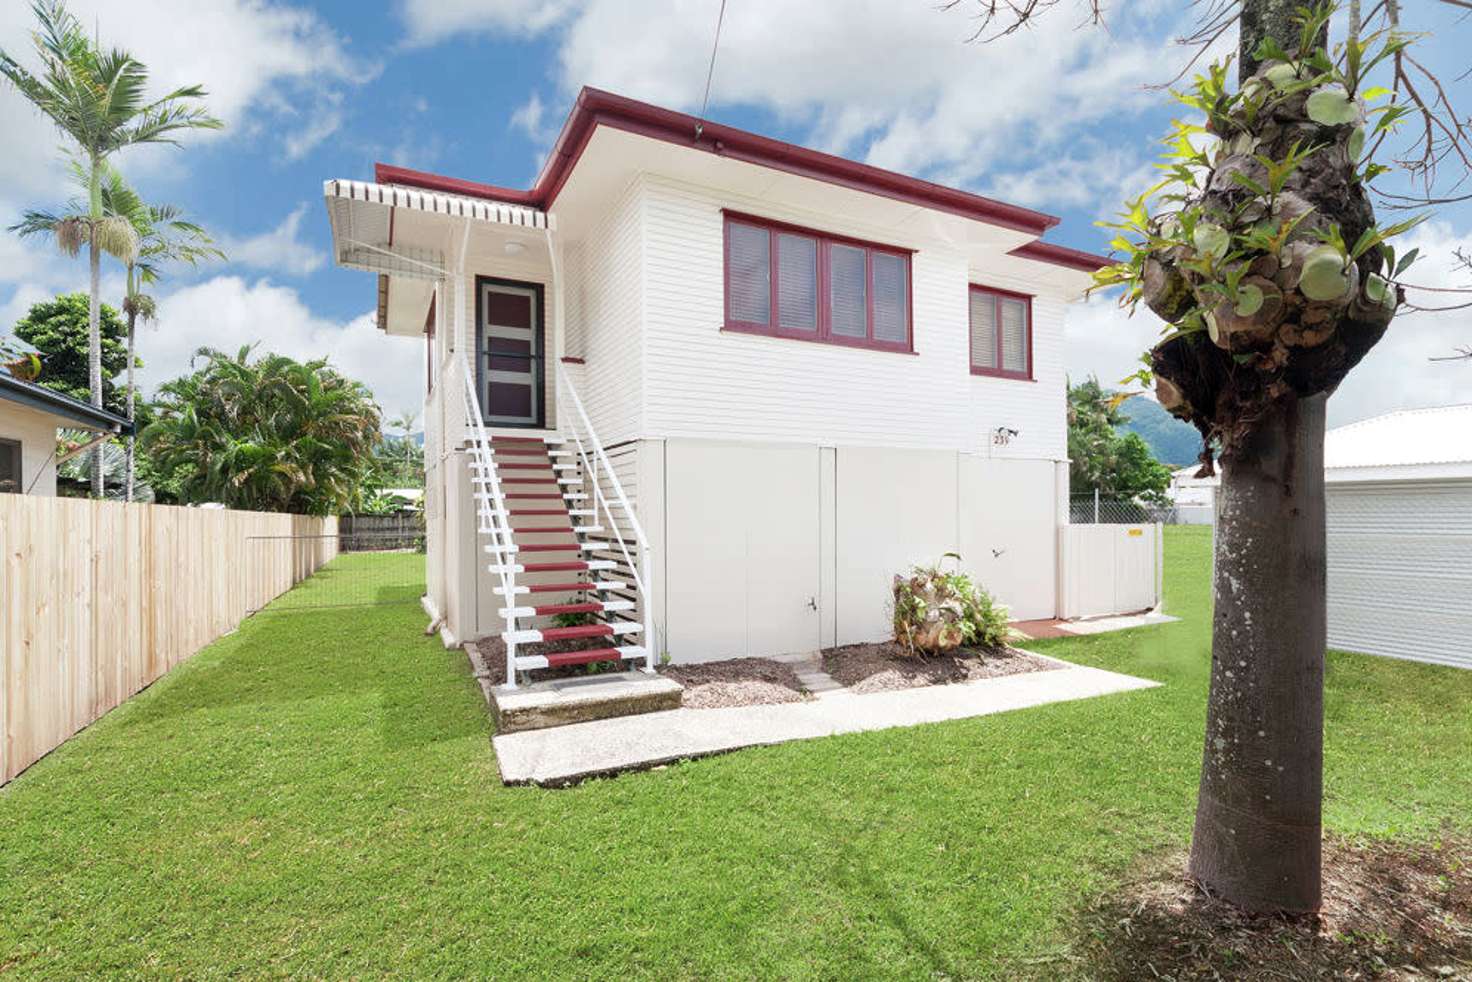 Main view of Homely house listing, 239 McCoombe Street, Bungalow QLD 4870